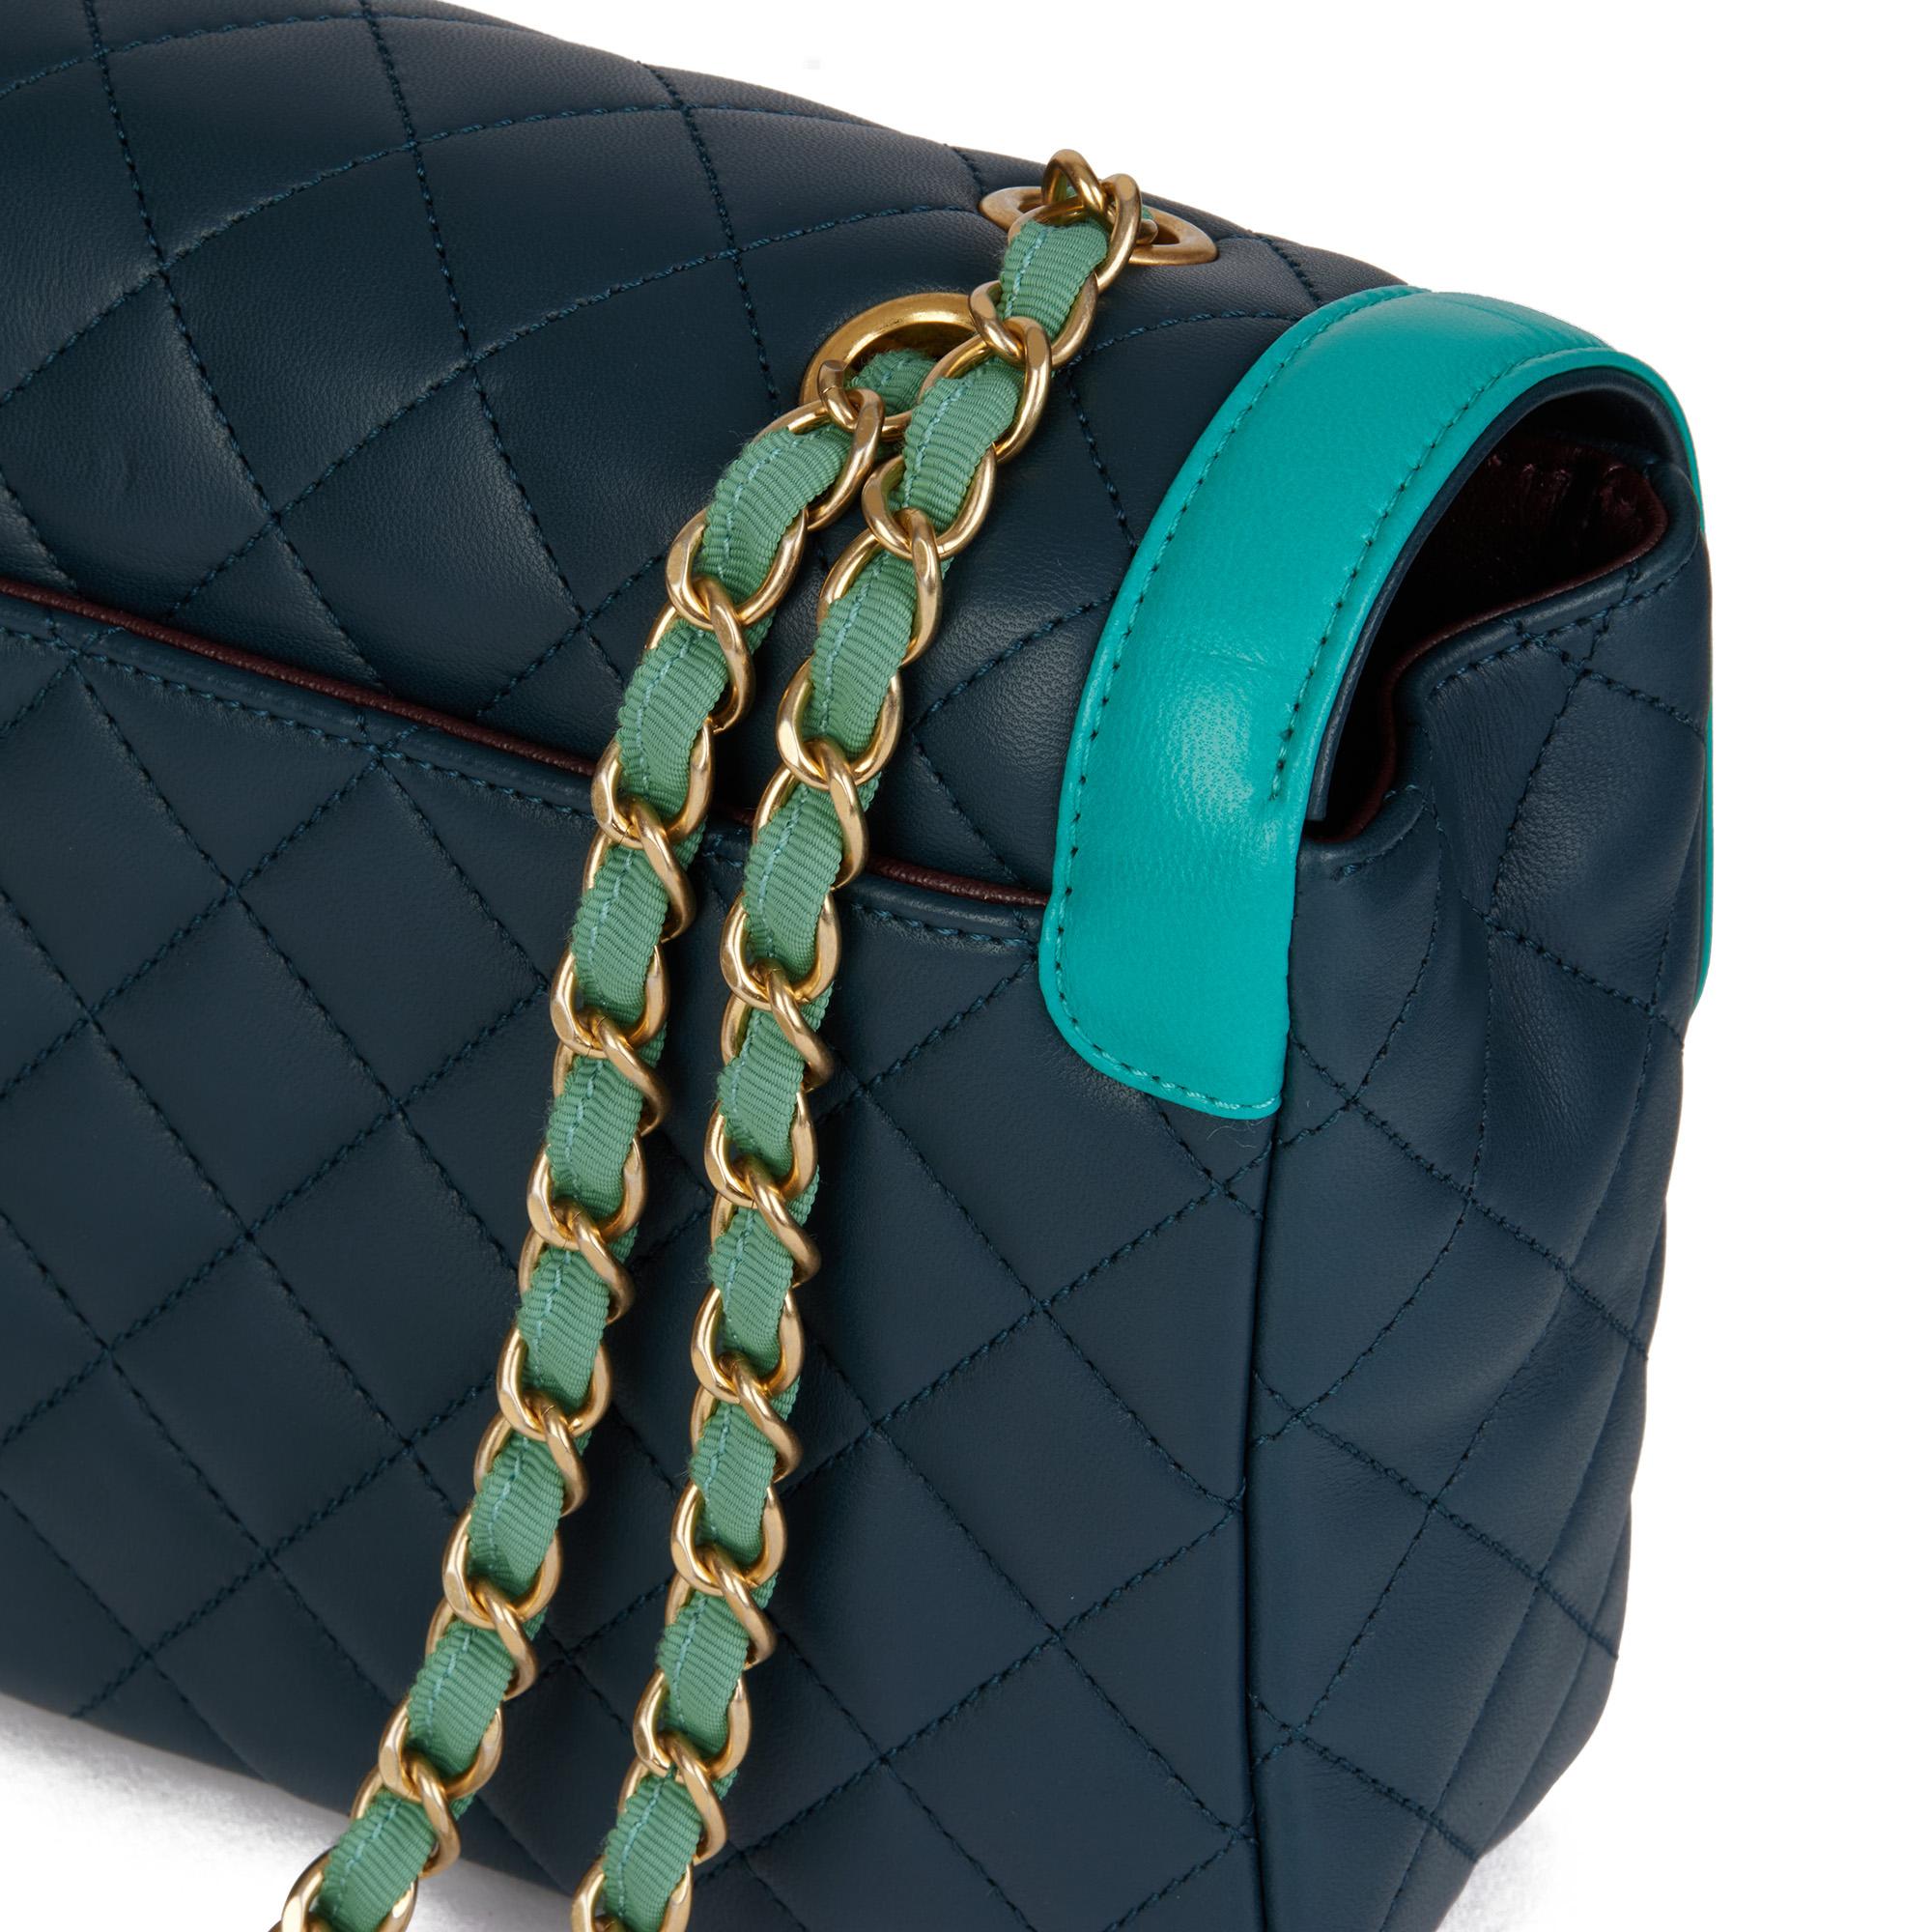 CHANEL Navy & Turquoise Quilted Lambskin Medium Classic Single Flap Bag 3